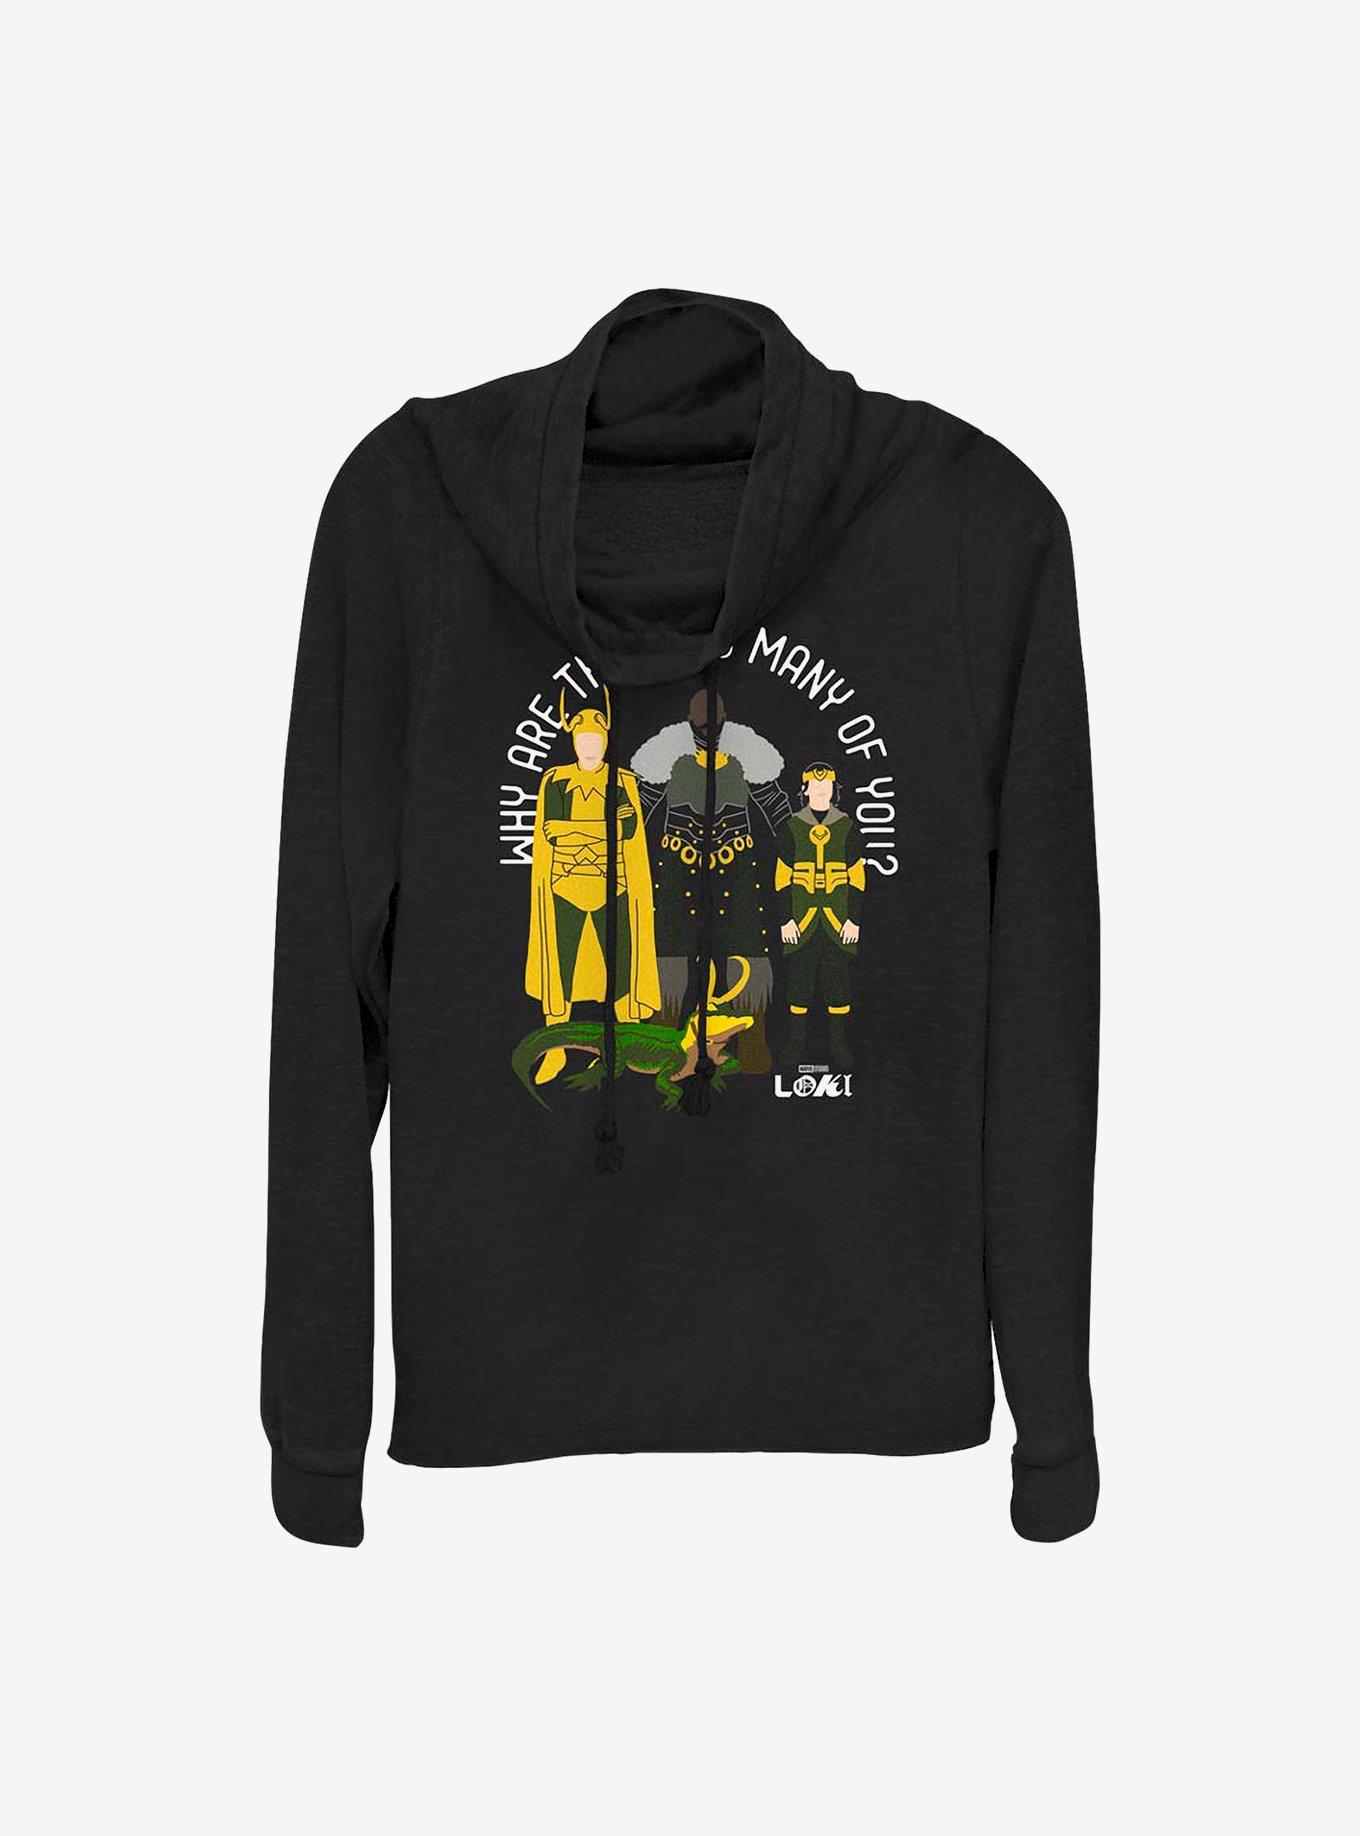 Marvel Loki Why Are There So Many Of You? Cowlneck Long-Sleeve Girls Top, BLACK, hi-res